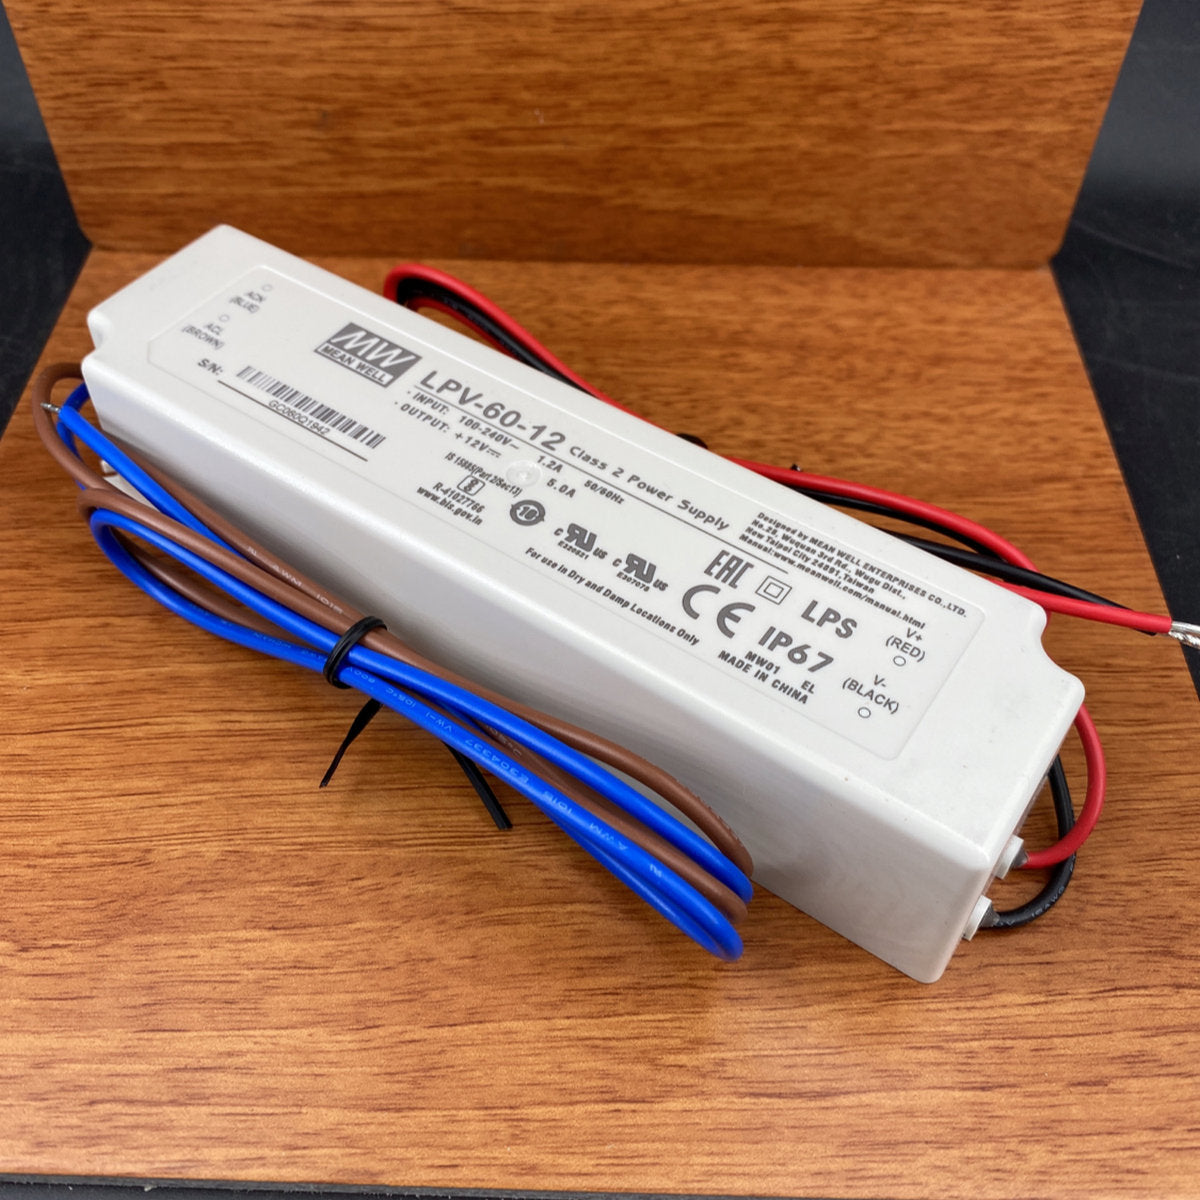 Mean Well LPV-60-12 LED Driver  In Stock, Same Day Shipping — TRC  Electronics